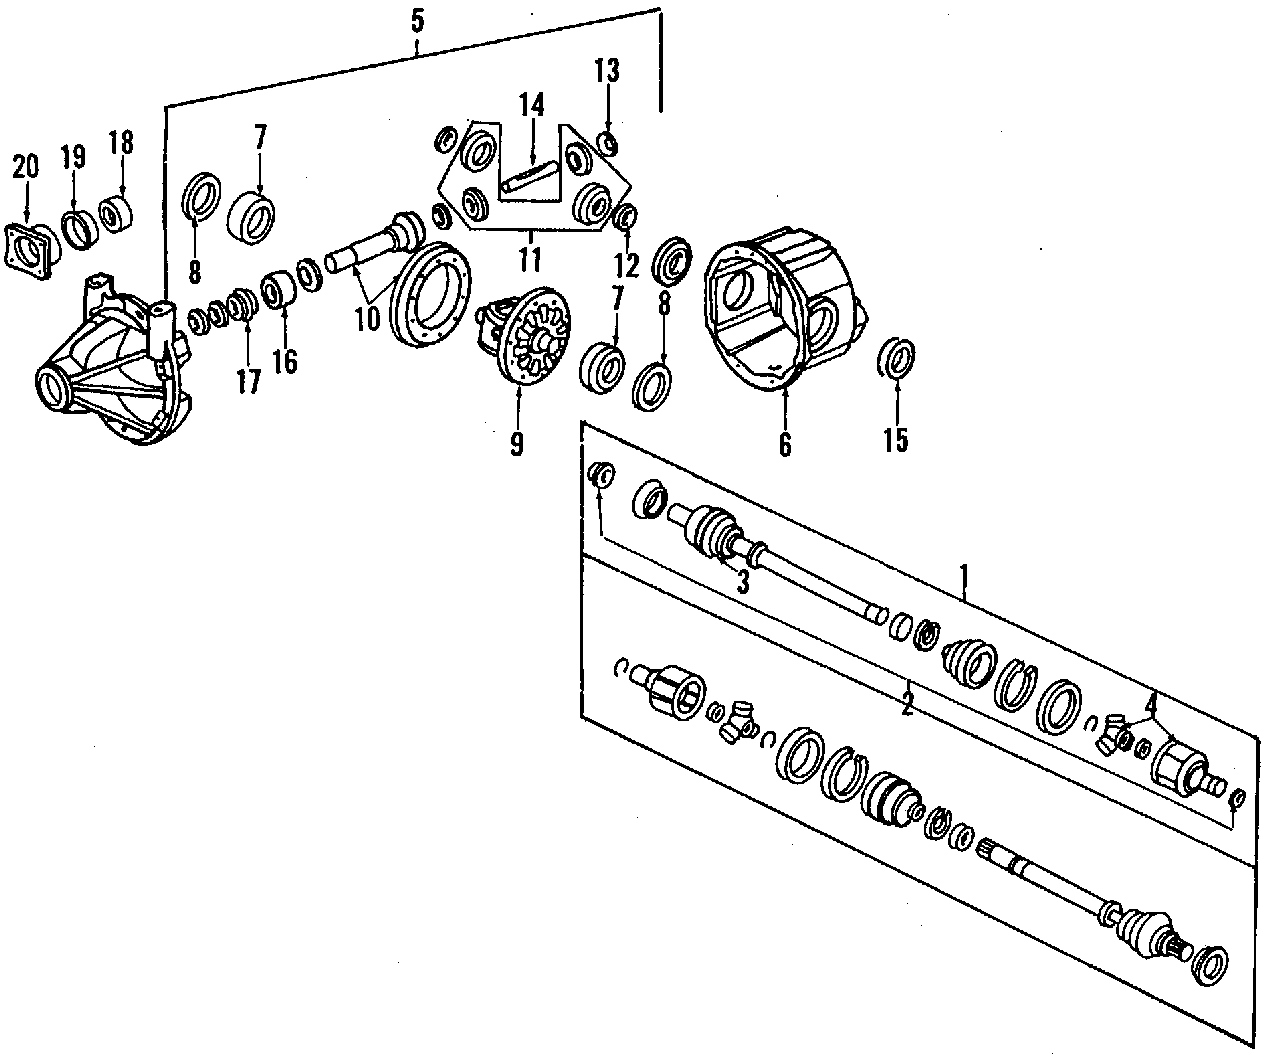 20REAR AXLE. AXLE SHAFTS & JOINTS. DIFFERENTIAL. PROPELLER SHAFT.https://images.simplepart.com/images/parts/motor/fullsize/F640360.png